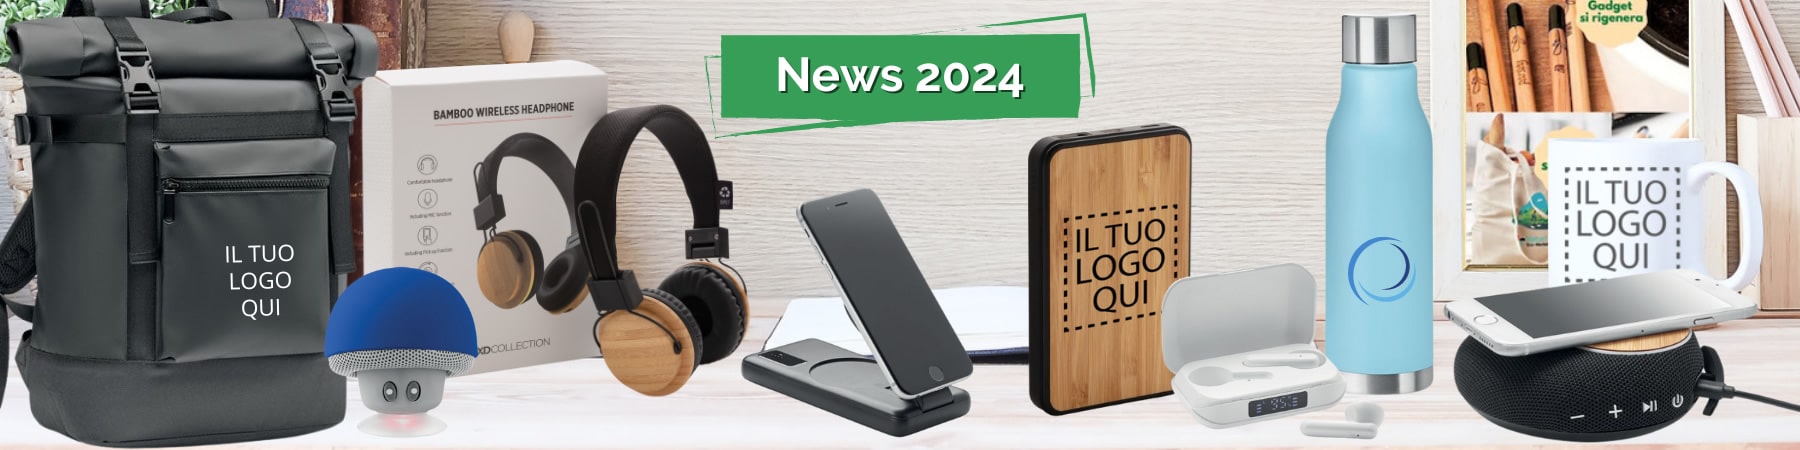 News 2024 Technological Gadgets with Logo Print